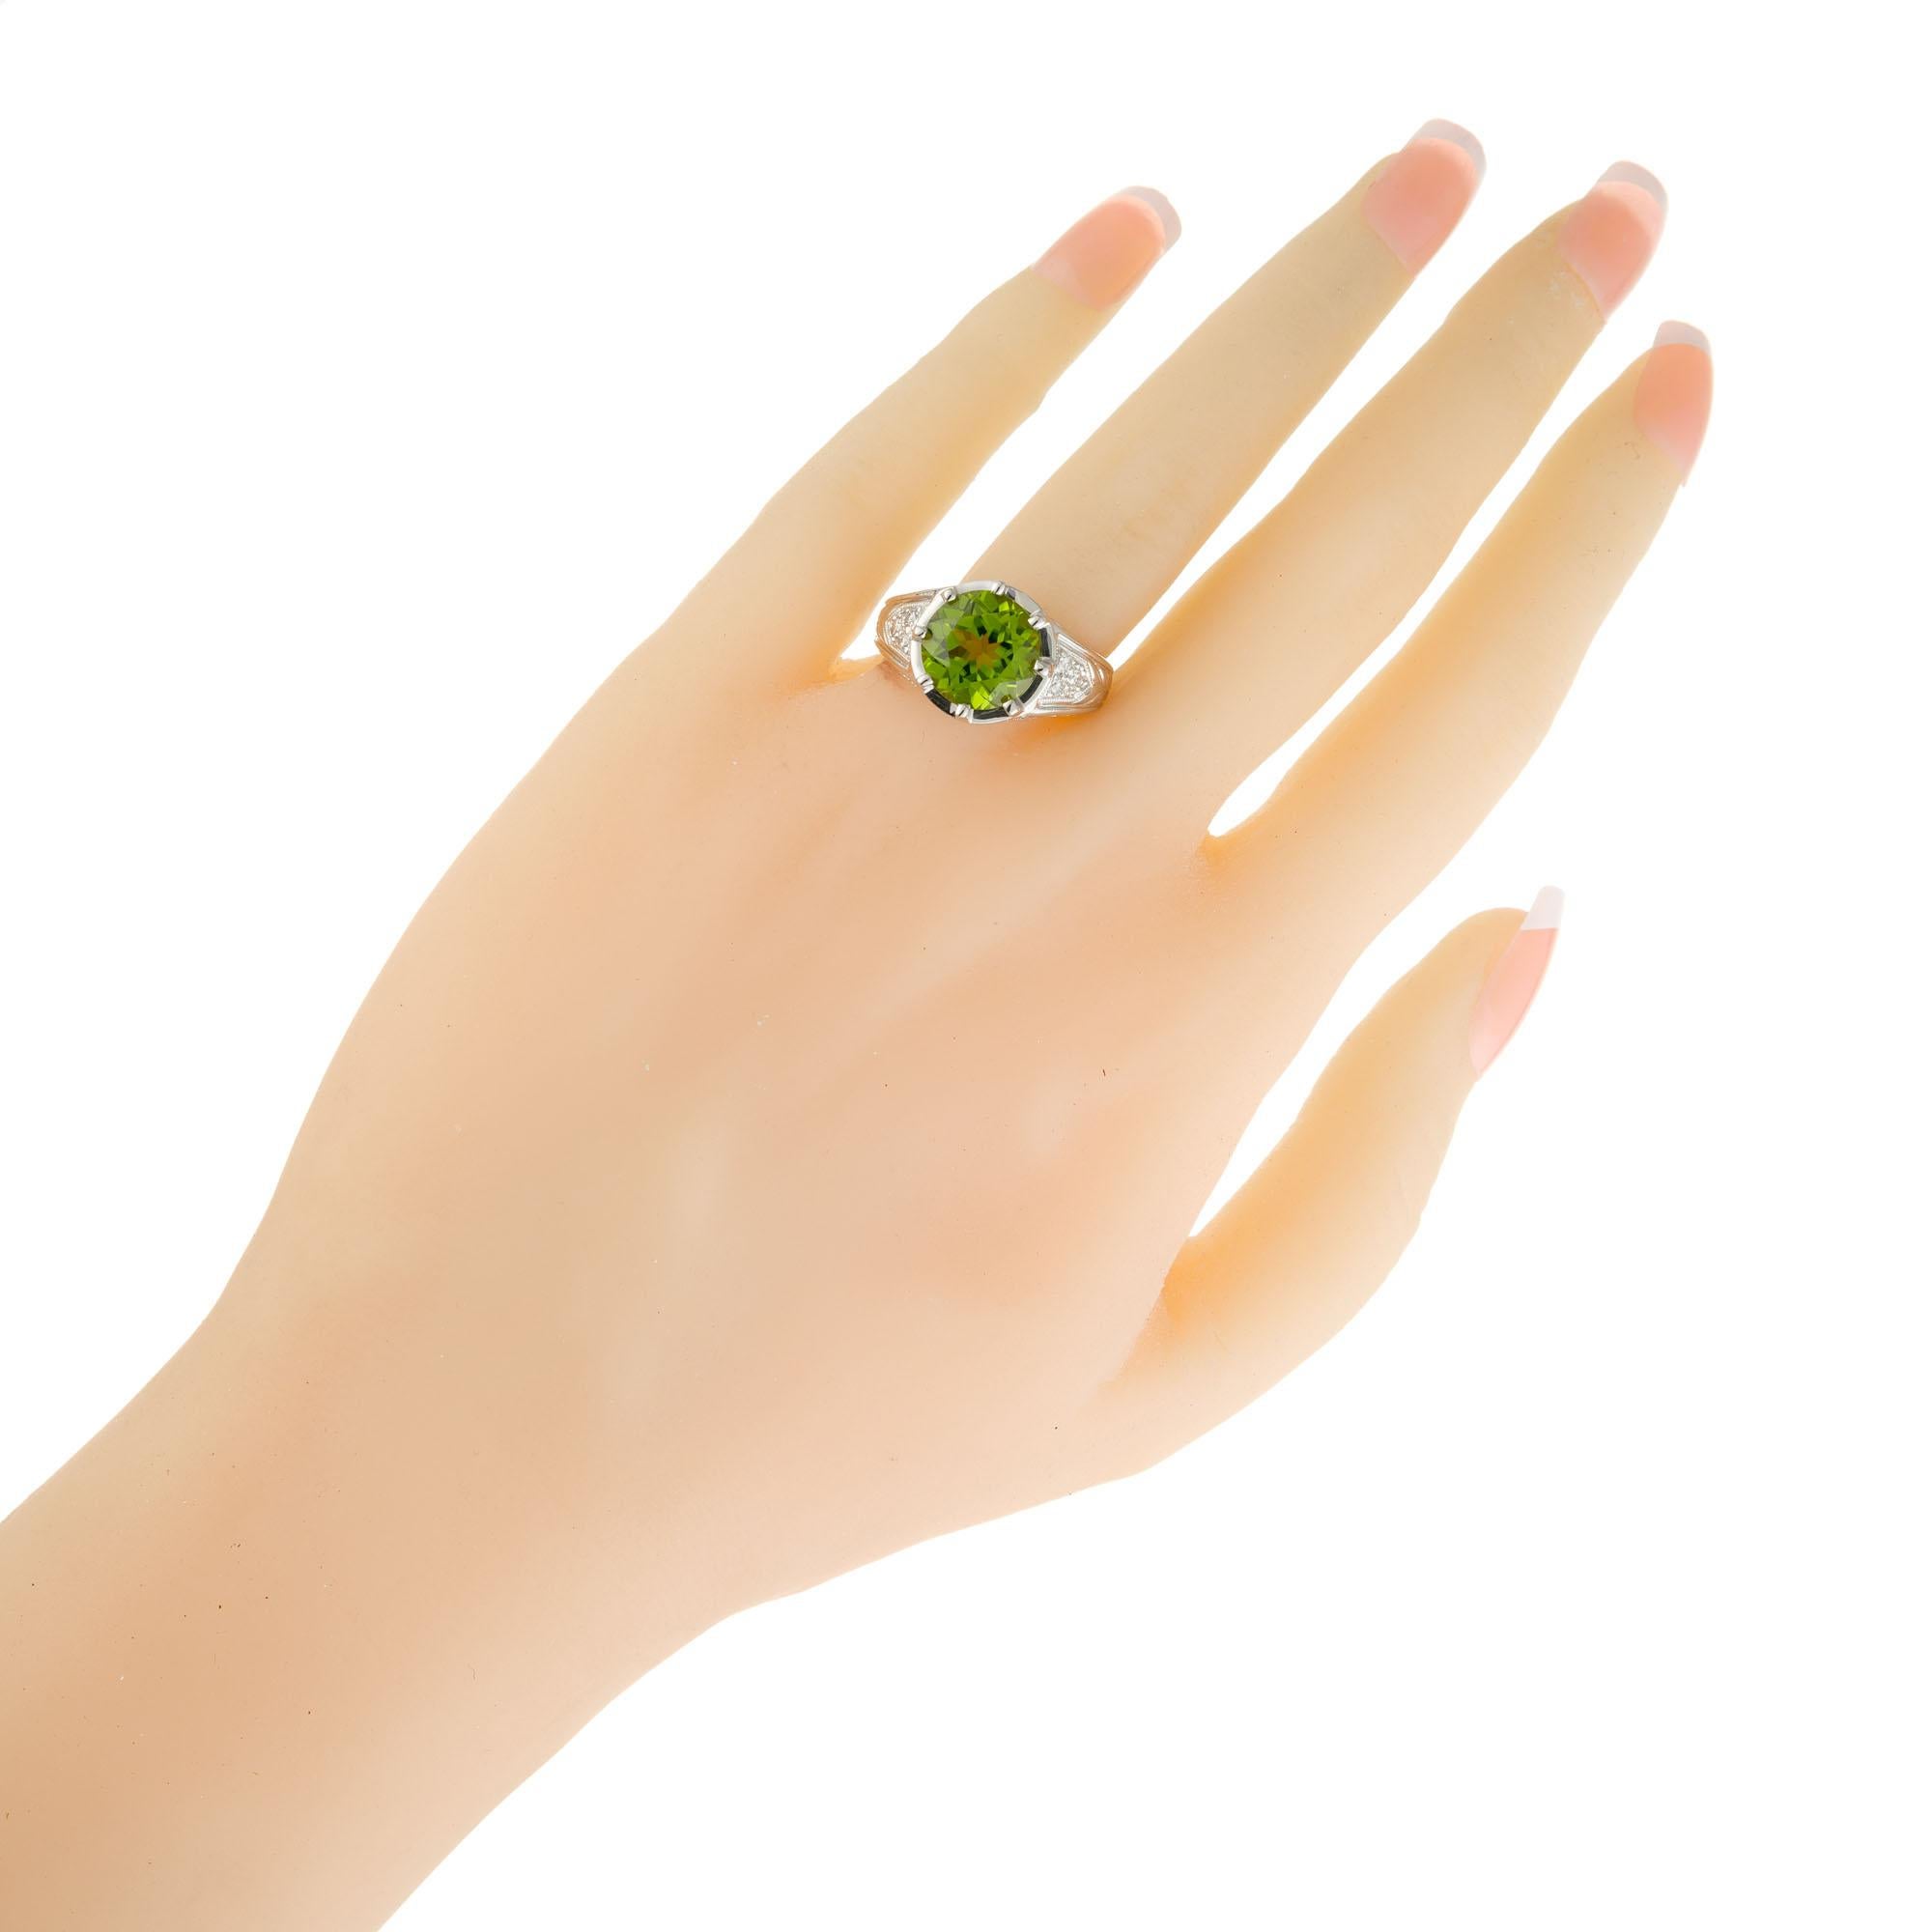 4.25 Carat Peridot Diamond Platinum Filigree Engagement Ring In Good Condition For Sale In Stamford, CT